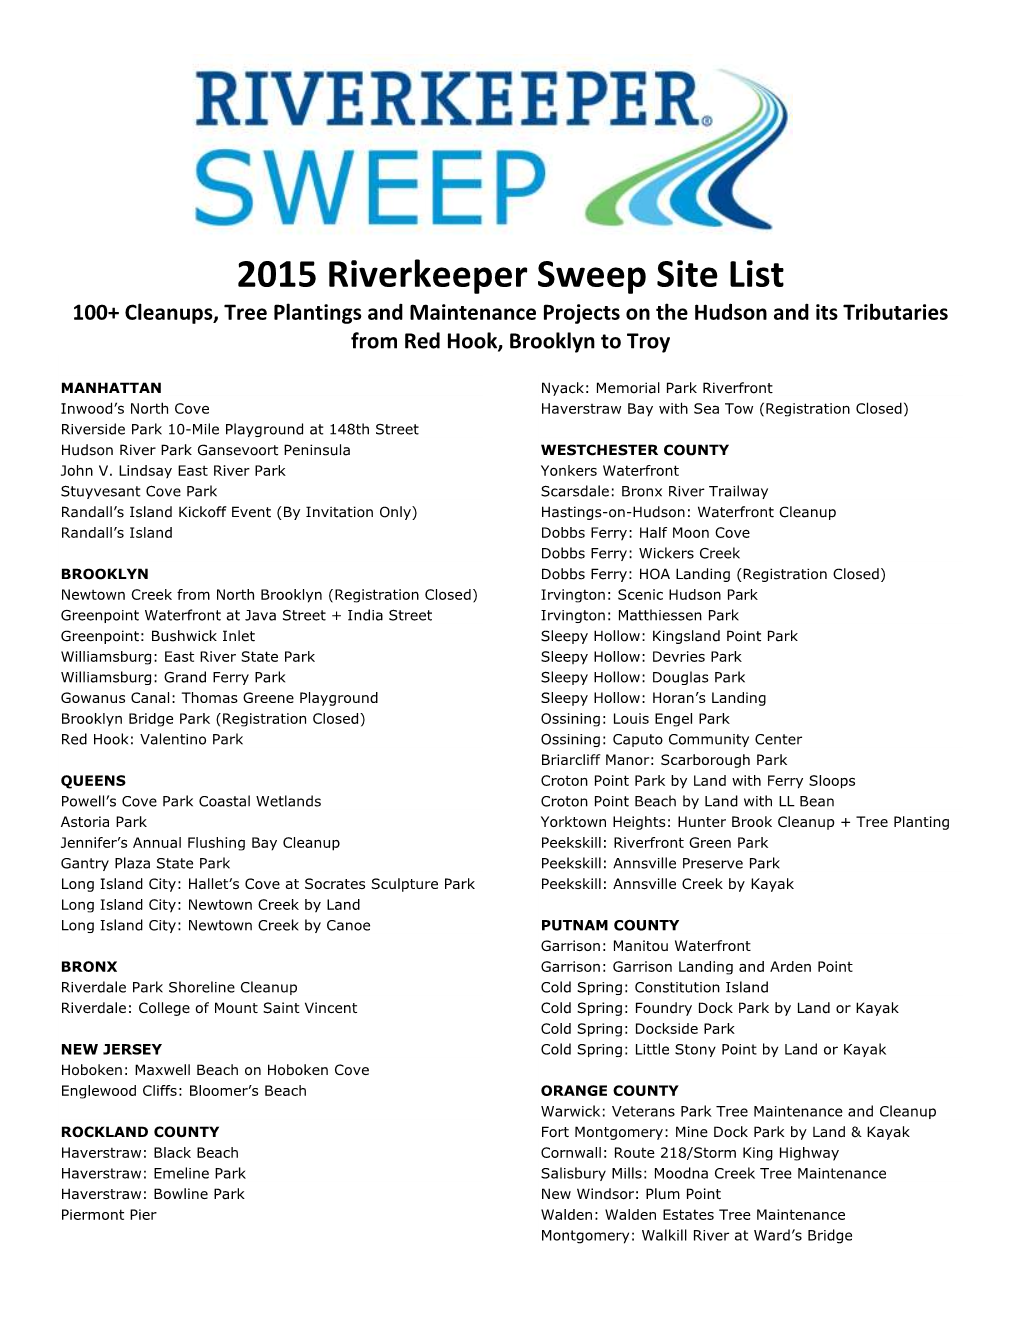 2015 Riverkeeper Sweep Site List 100+ Cleanups, Tree Plantings and Maintenance Projects on the Hudson and Its Tributaries from Red Hook, Brooklyn to Troy